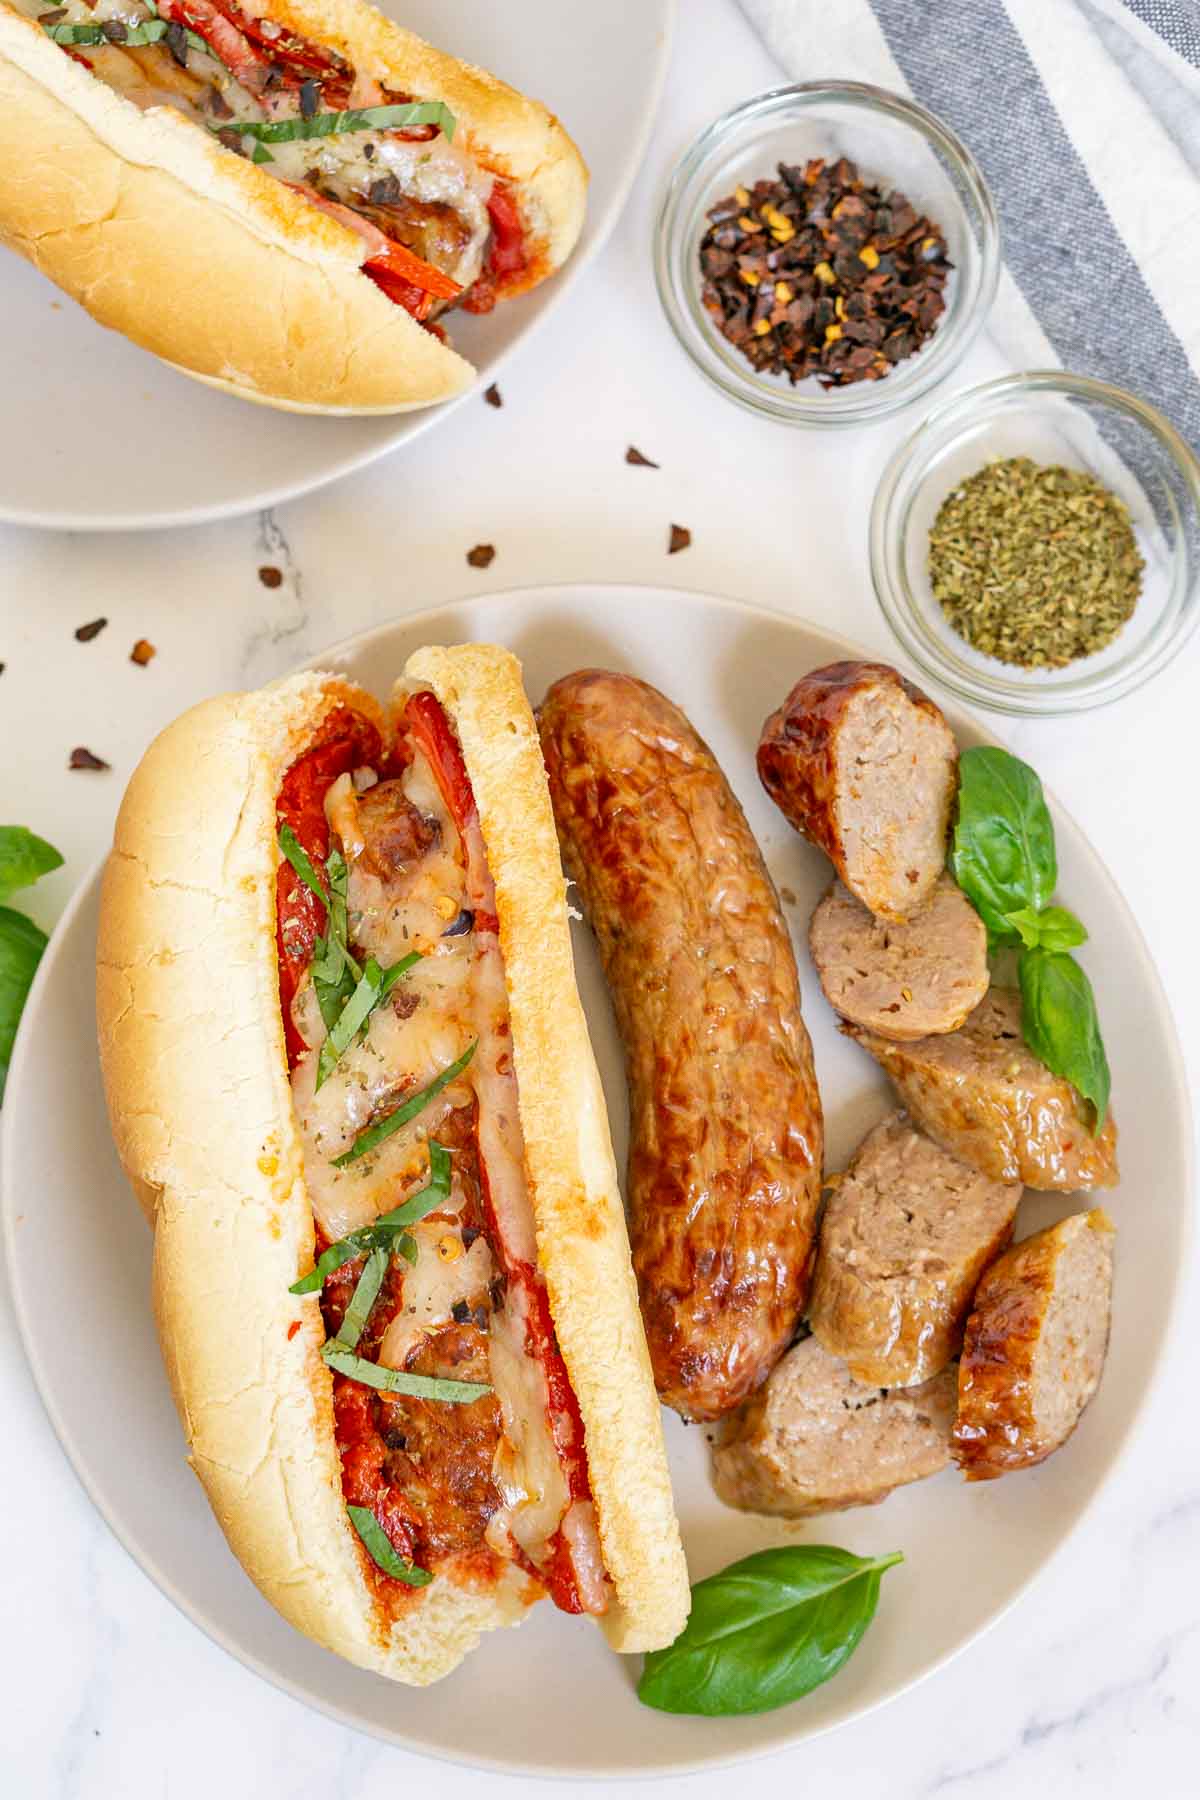 Plate of air fried Italian sausages and Italian sausage sandwich